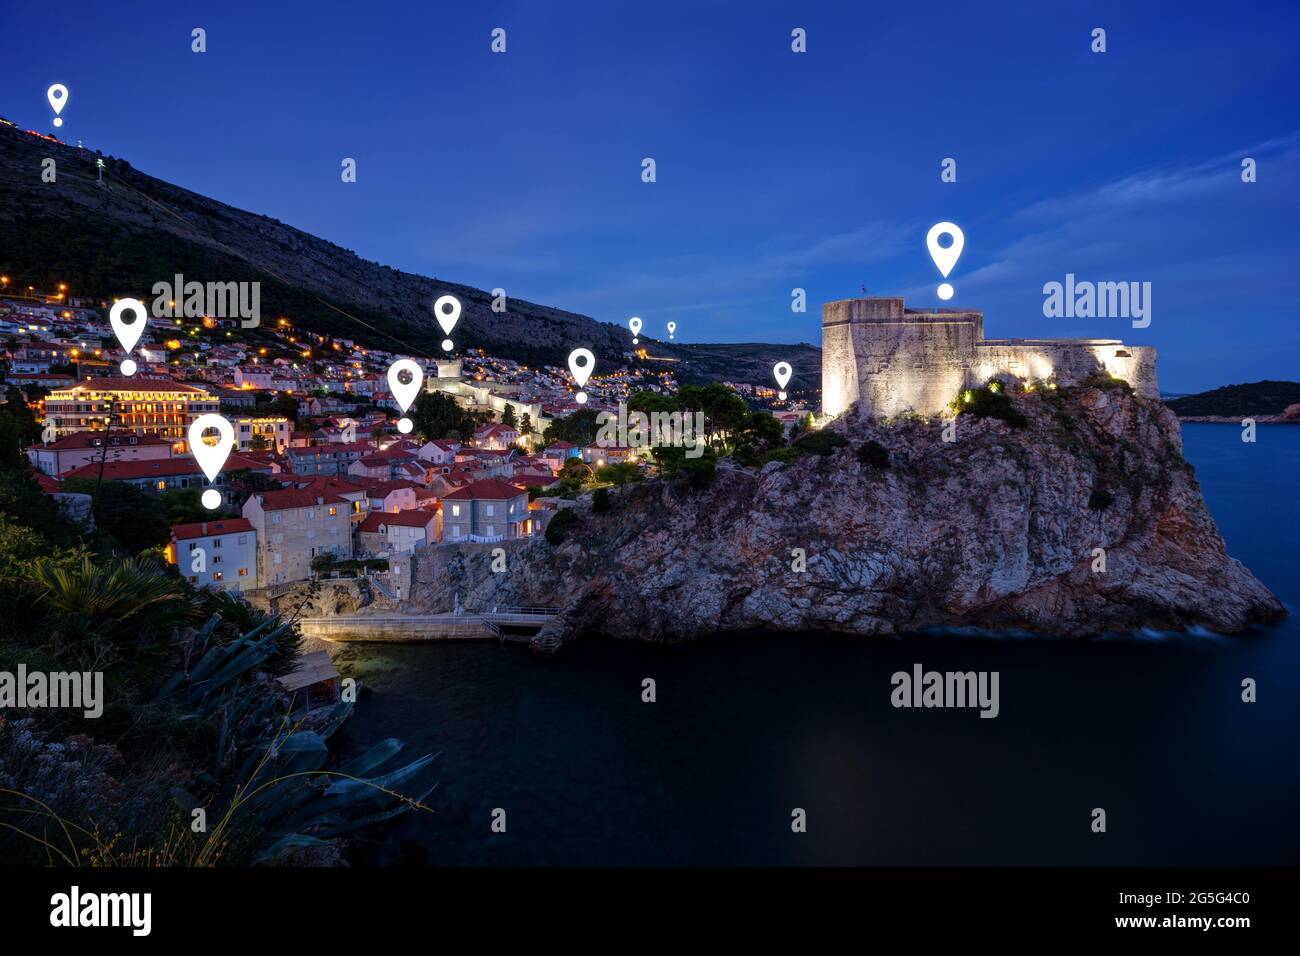 Map pin icons on Dubrovnik's cityscape at dusk. Old Town of Dubrovnik and Fort Lovrijenac in Croatia at night. Stock Photo